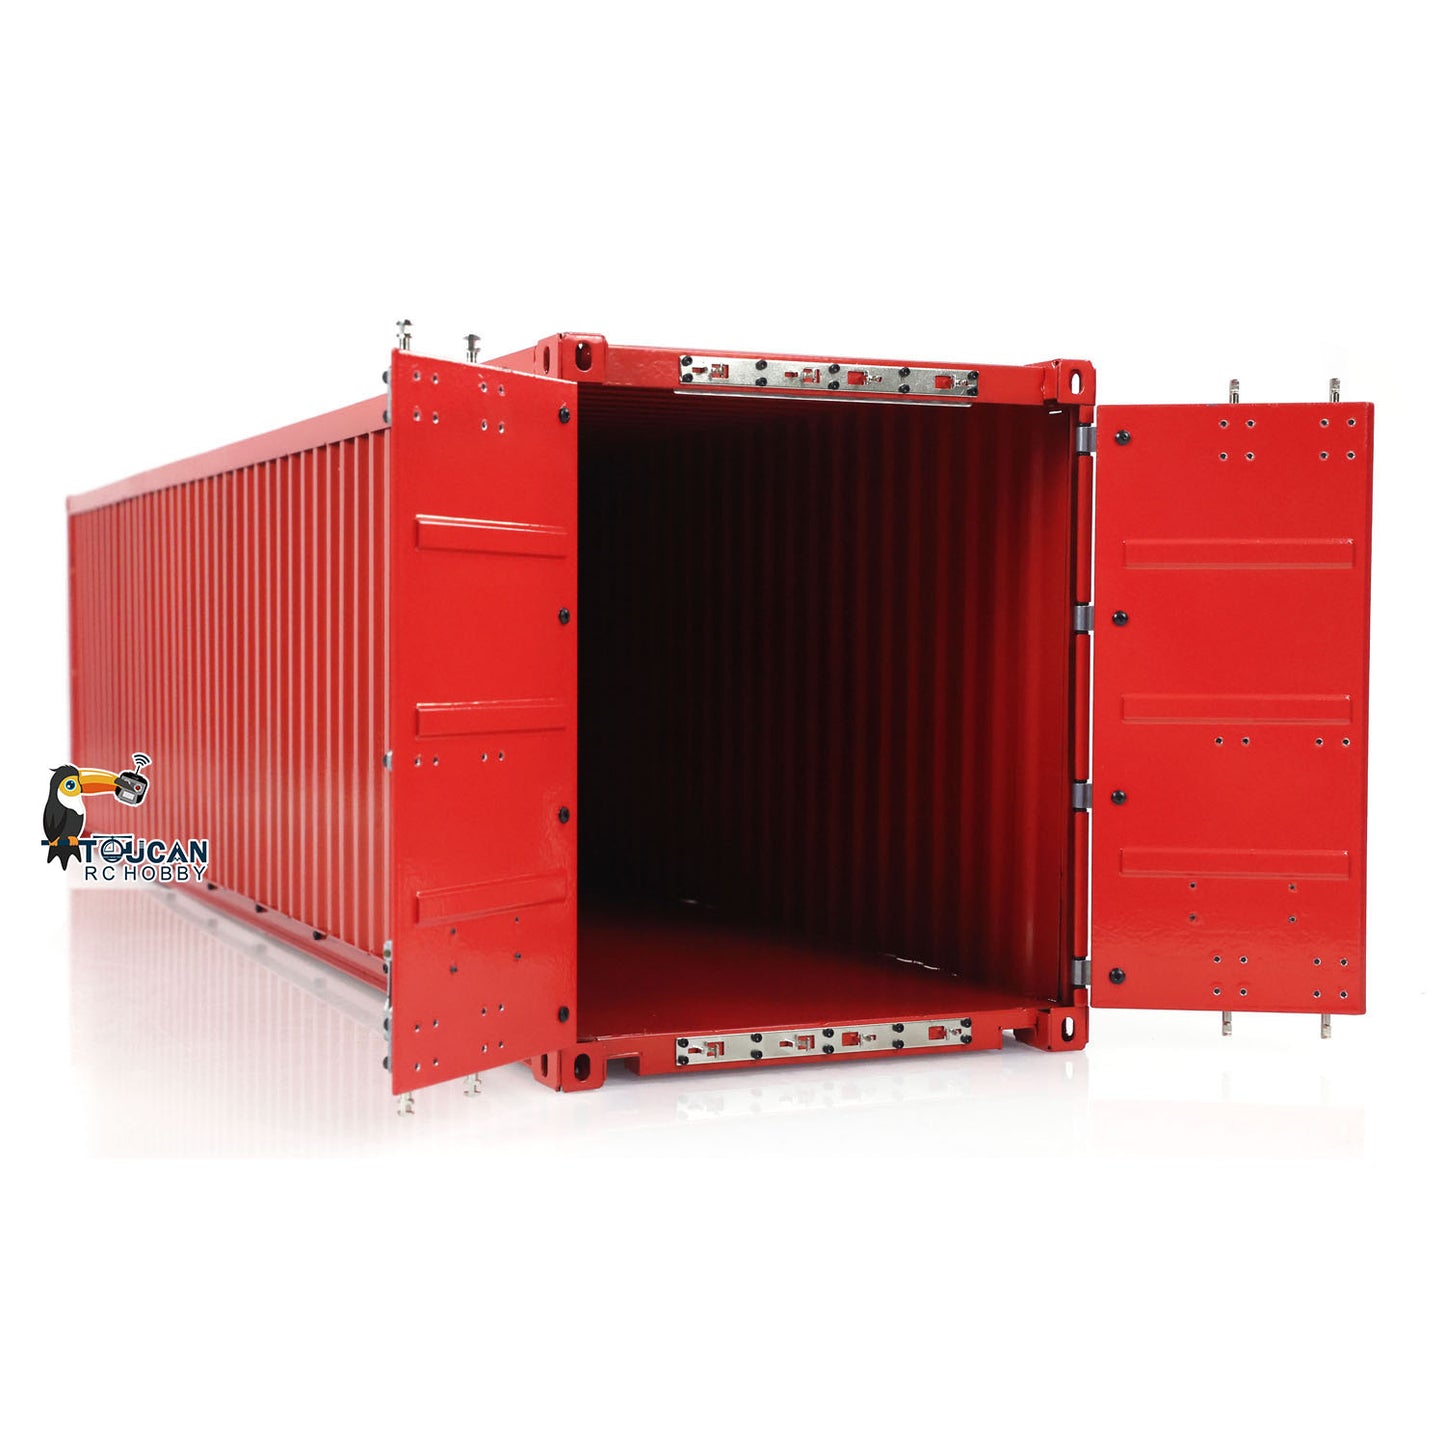 1/14 Full Metal 40 Feet Container for RC Tractor Truck Remote Controlled Trailers Painted and Assembled DIY Parts